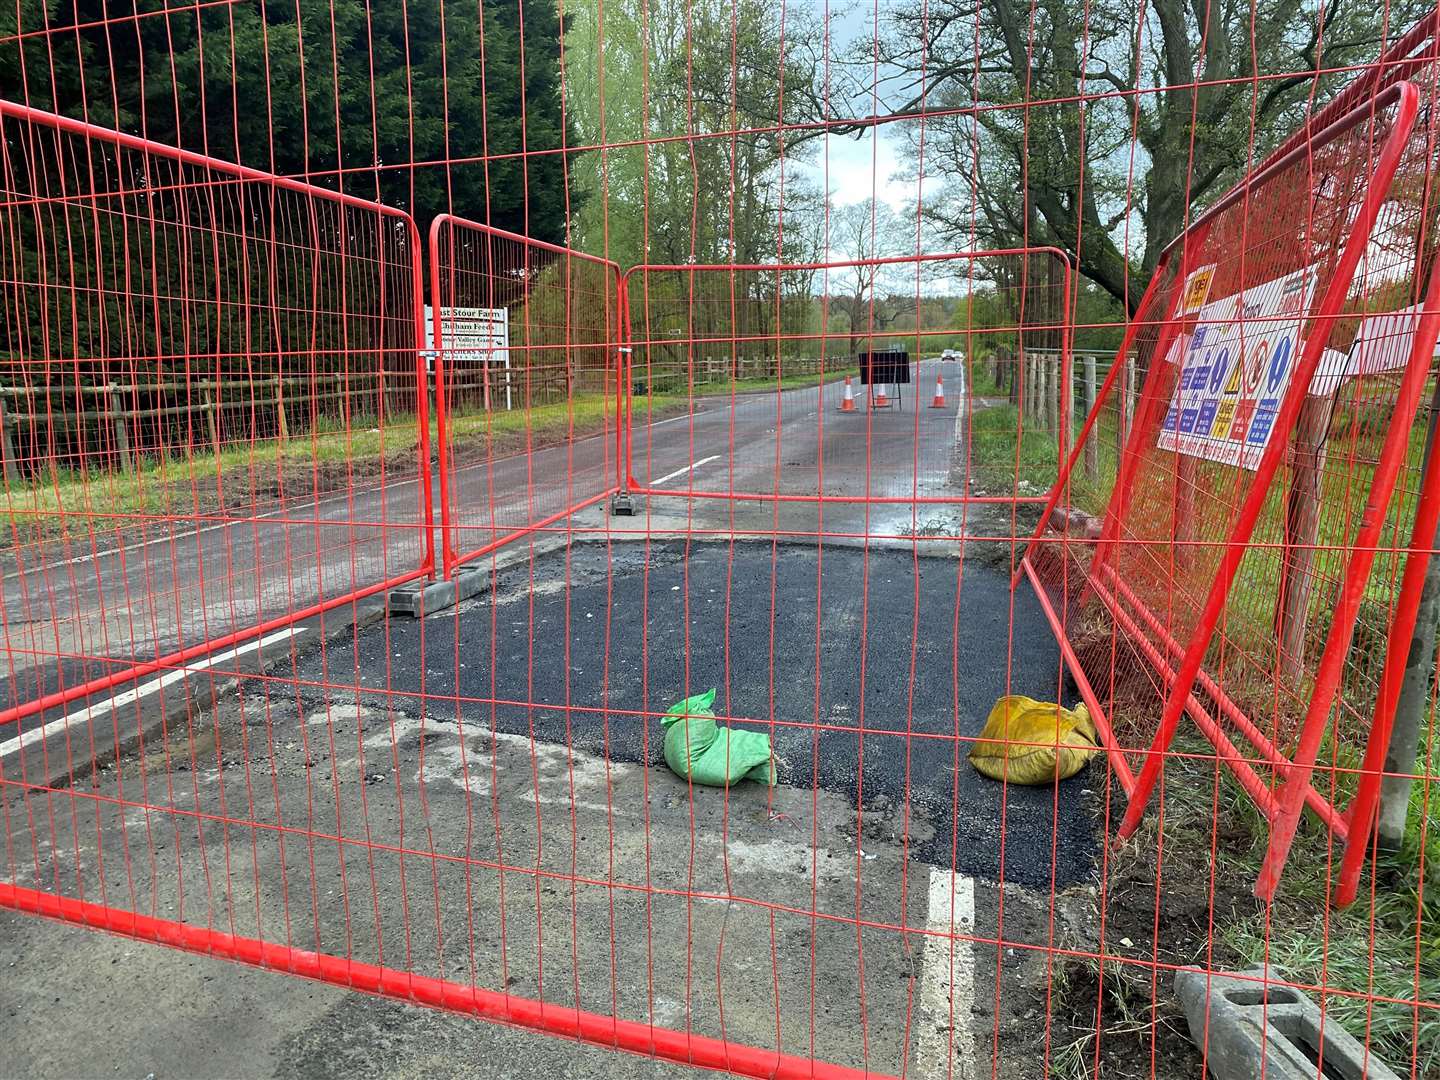 The road was shut on two occasions this month for South East Water pipe repairs near Godmersham